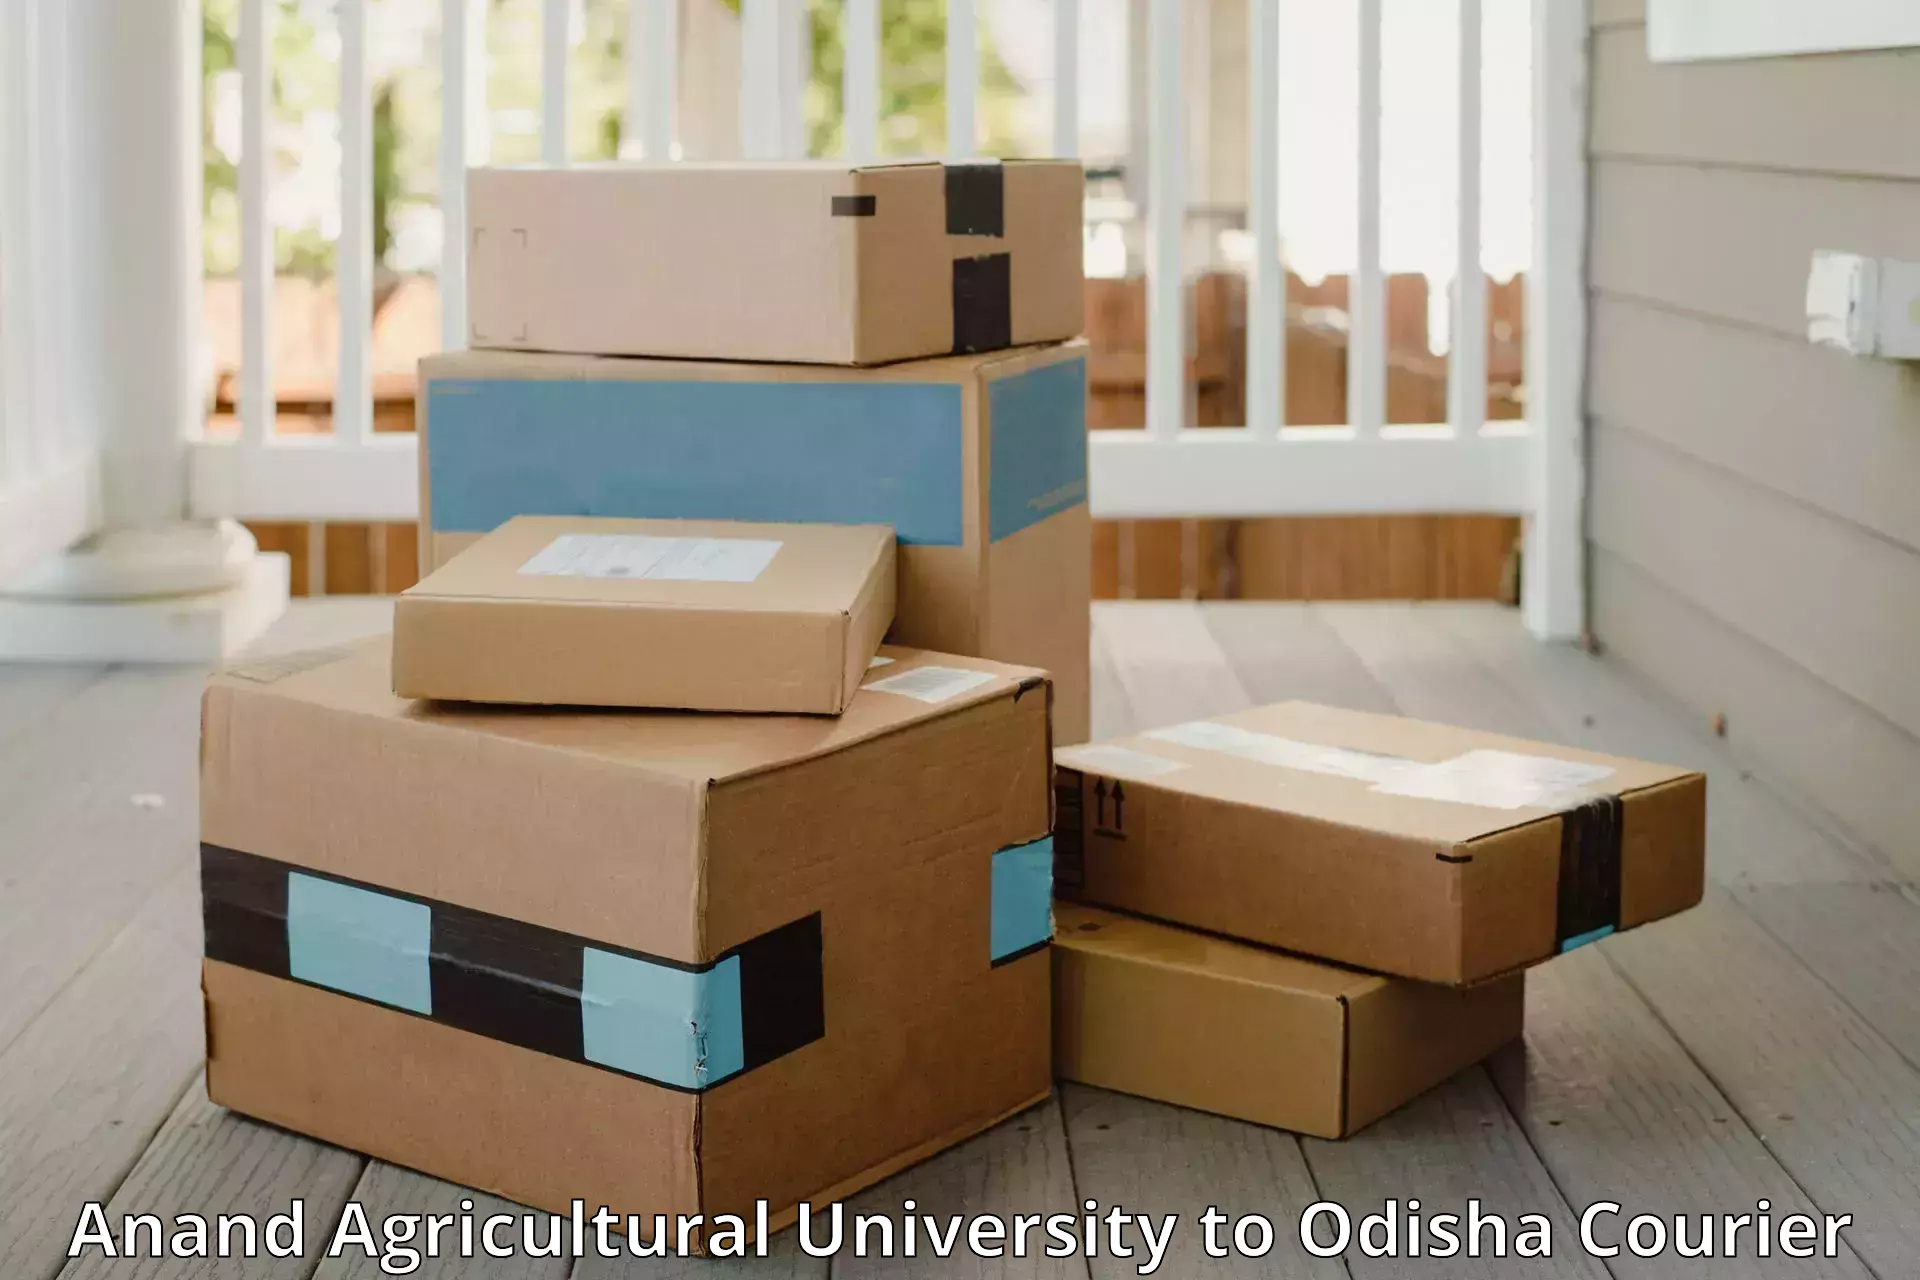 Instant baggage transport quote Anand Agricultural University to Kosagumuda